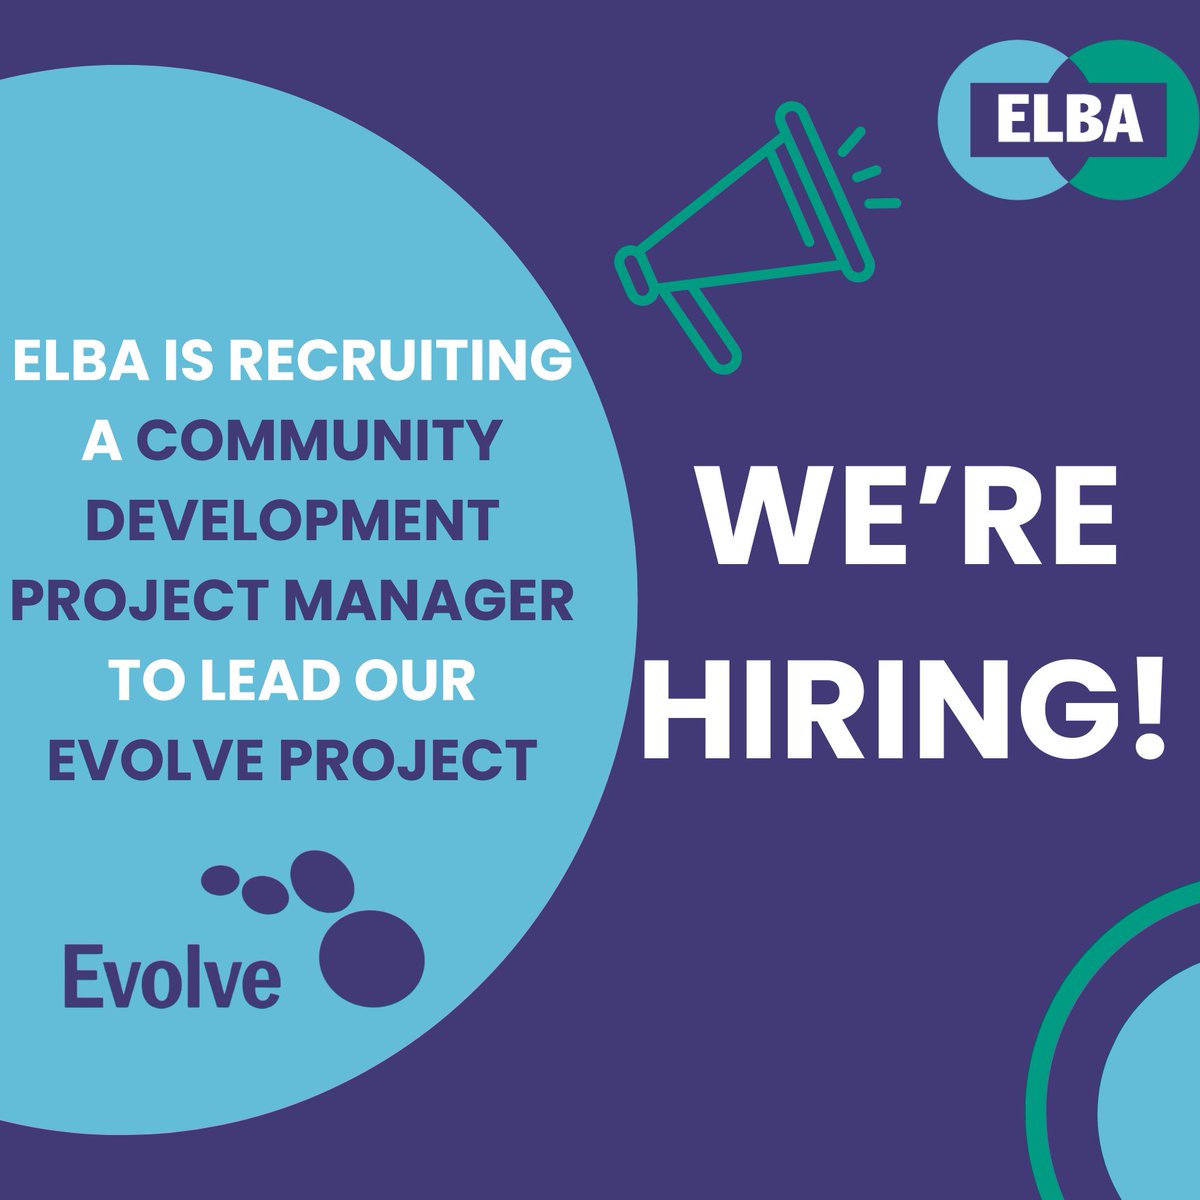 ELBA IS HIRING❗ We are recruiting a proactive & creative individual to lead an innovative project that empowers businesses & charities through employee volunteering. You can learn more about the Evolve Project 👉 bit.ly/3QrSON5'. & apply 👉 bit.ly/44p88jf